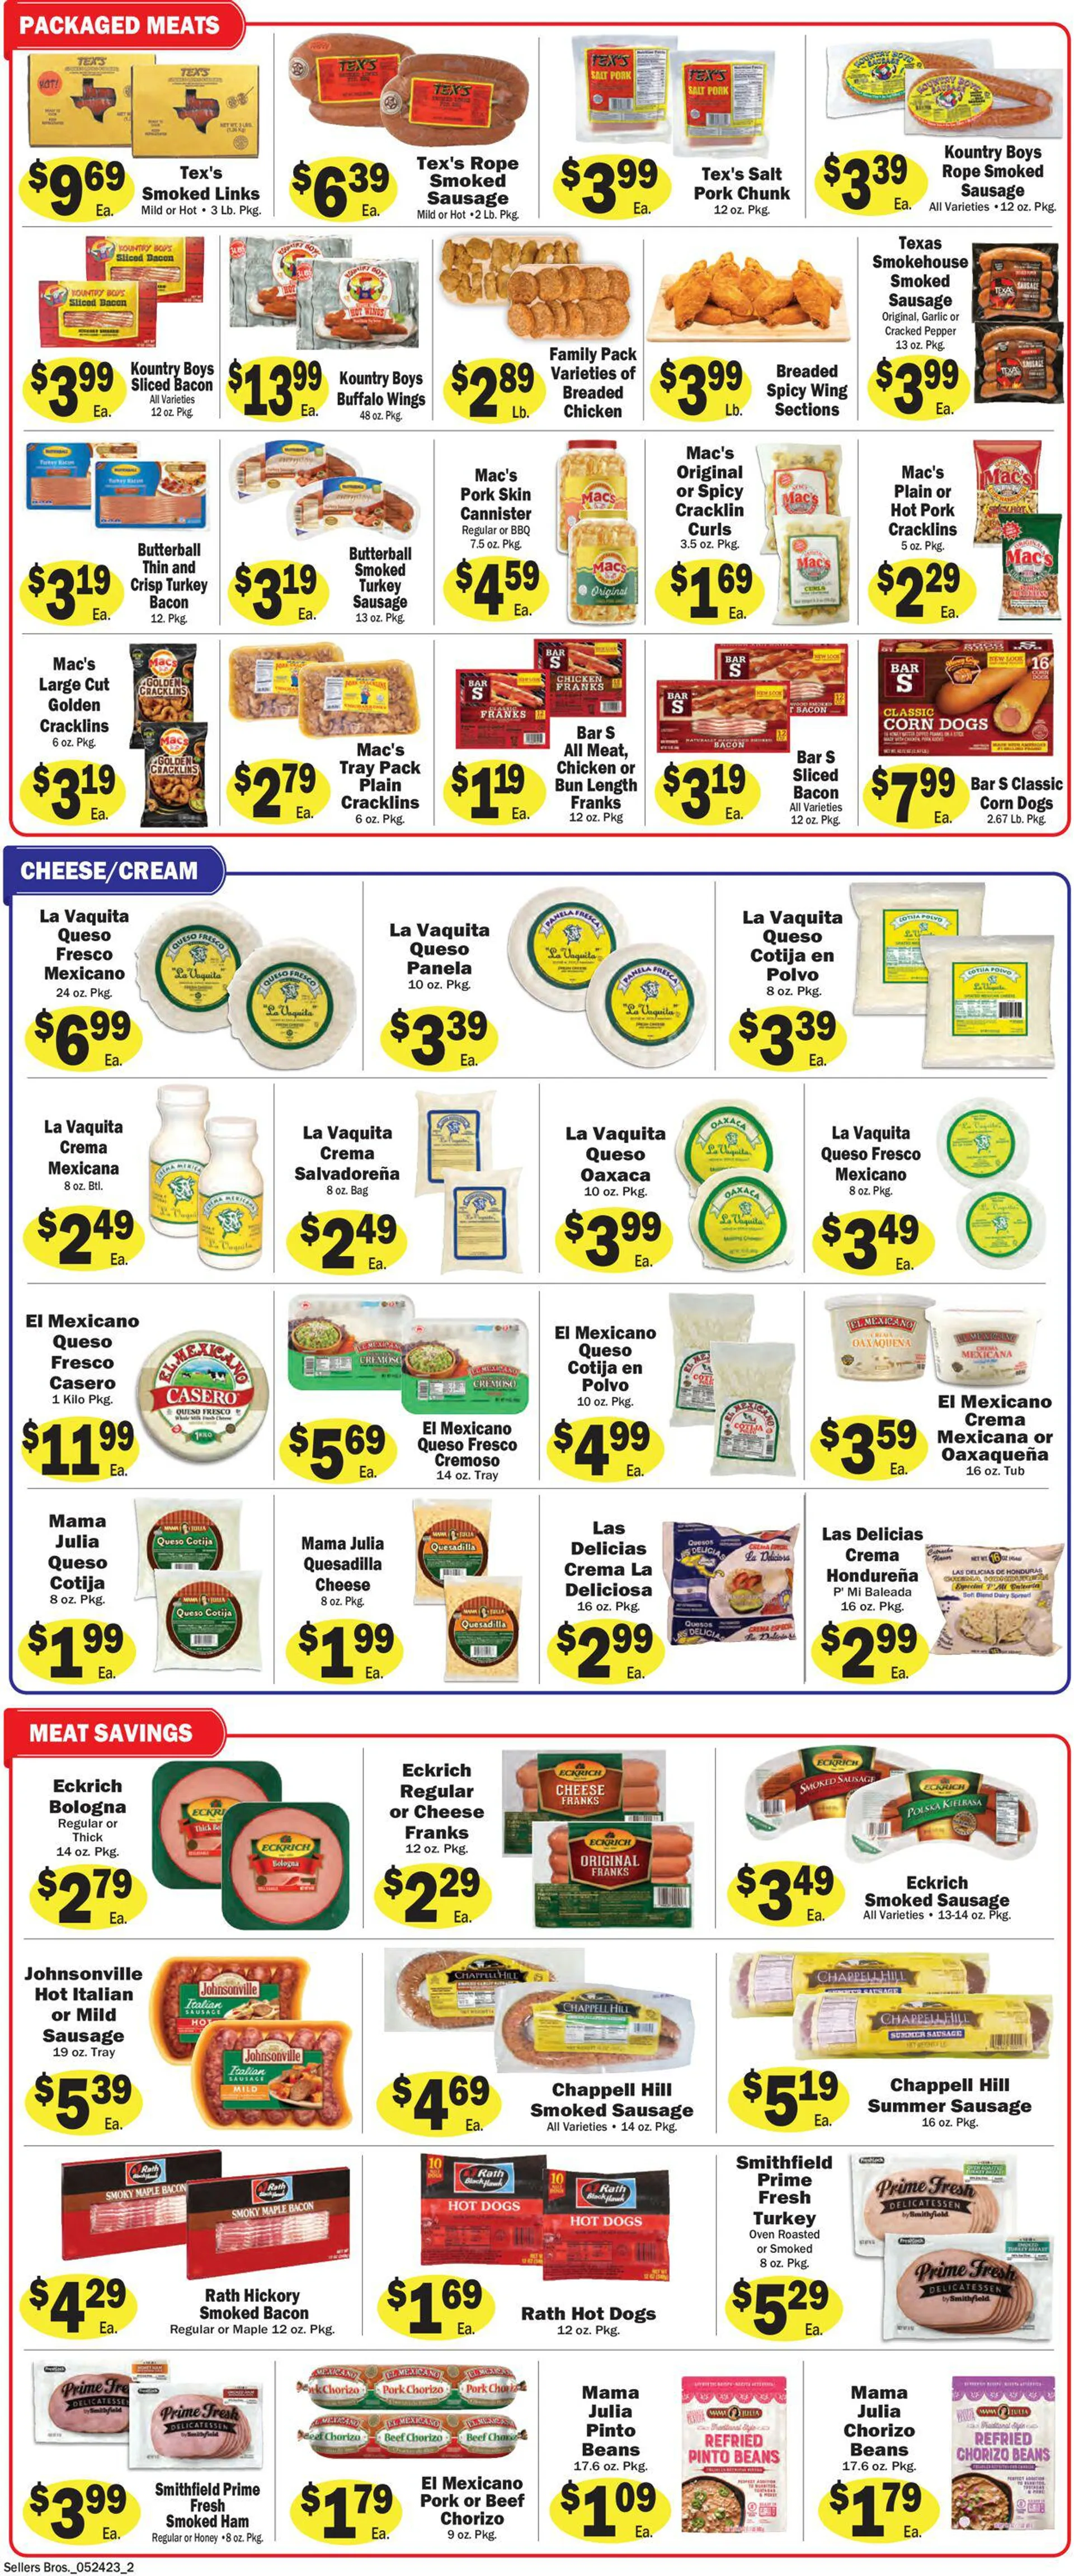 Sellers Bros. Current weekly ad - 2